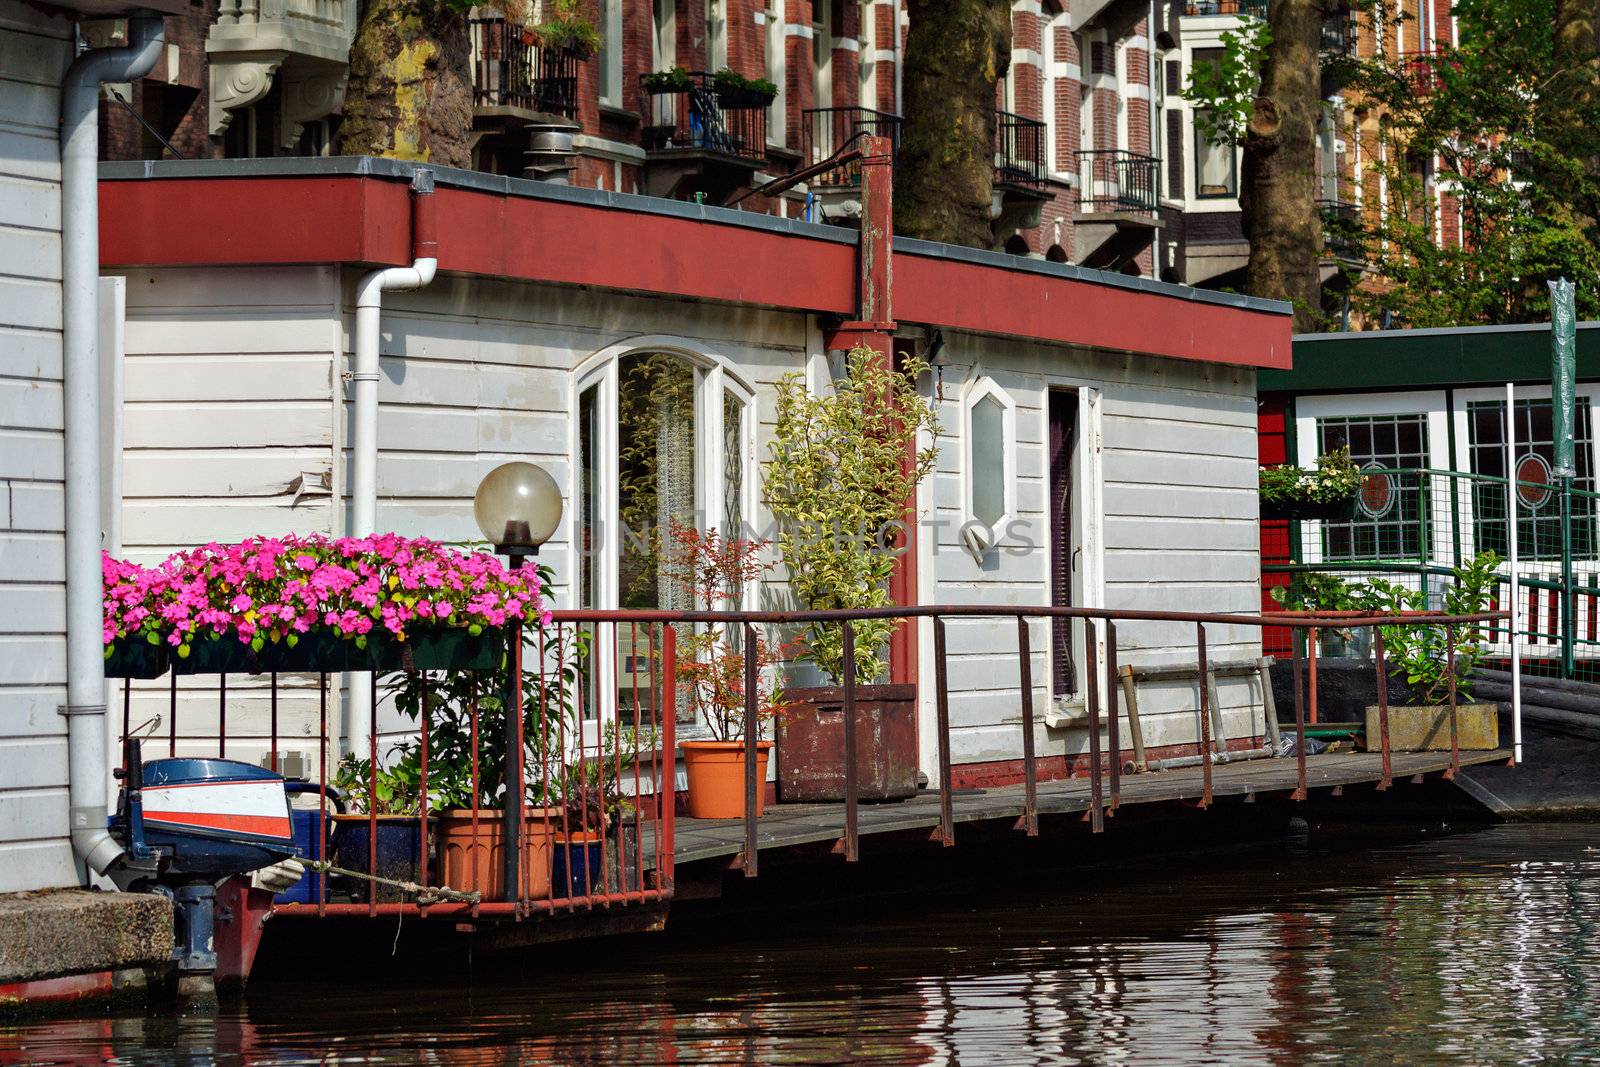 Canal Home of Amsterdam Netherlands by Roka